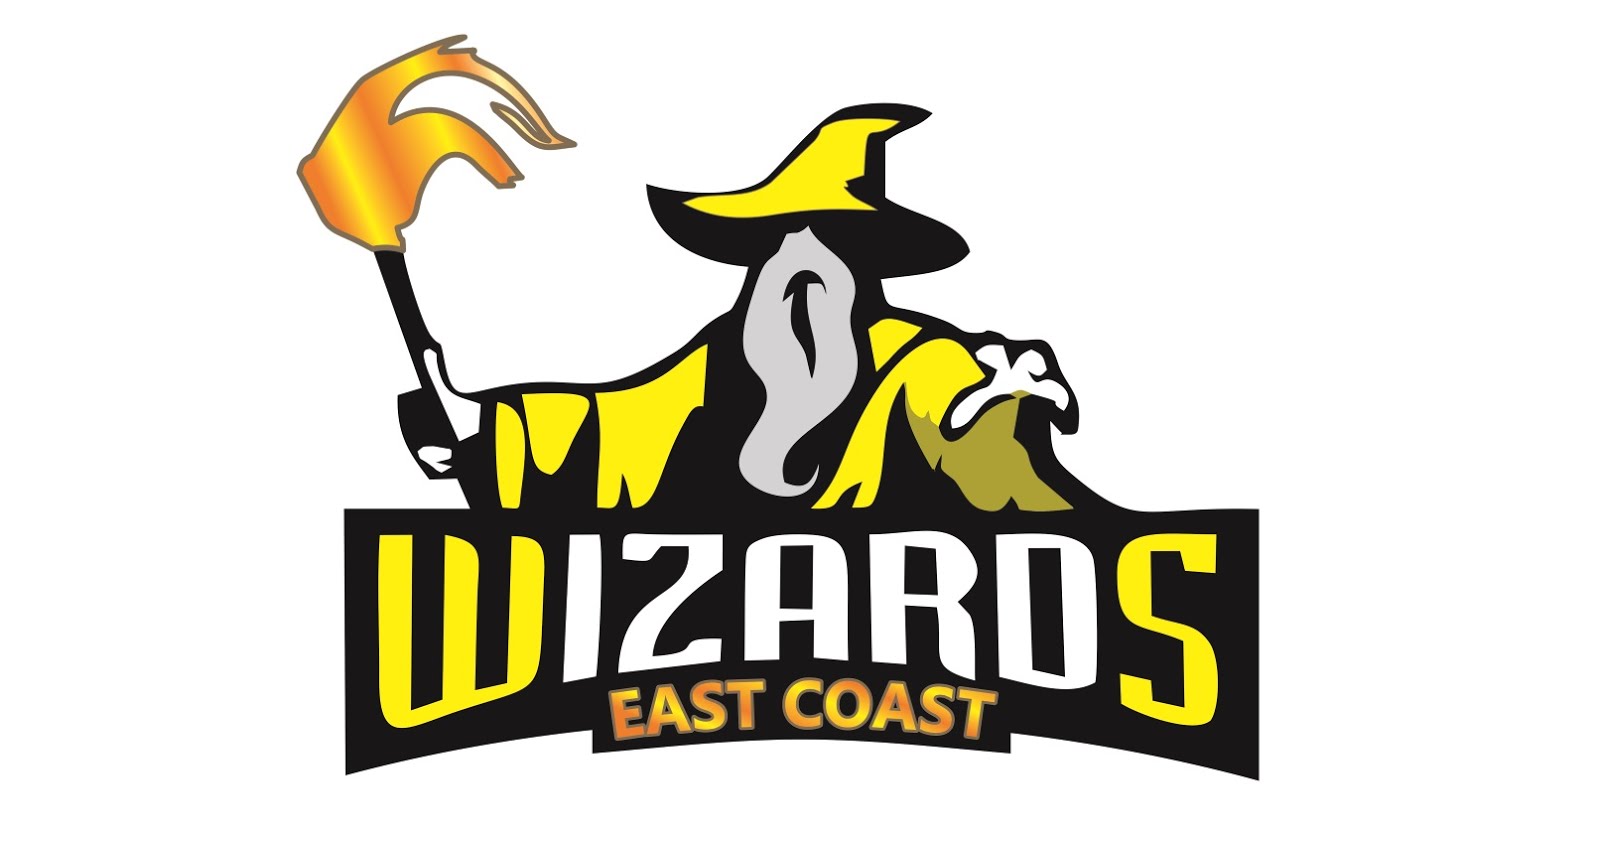 East Coast Wizards - Hollywoodbets Dolphins Premier League - Cricket